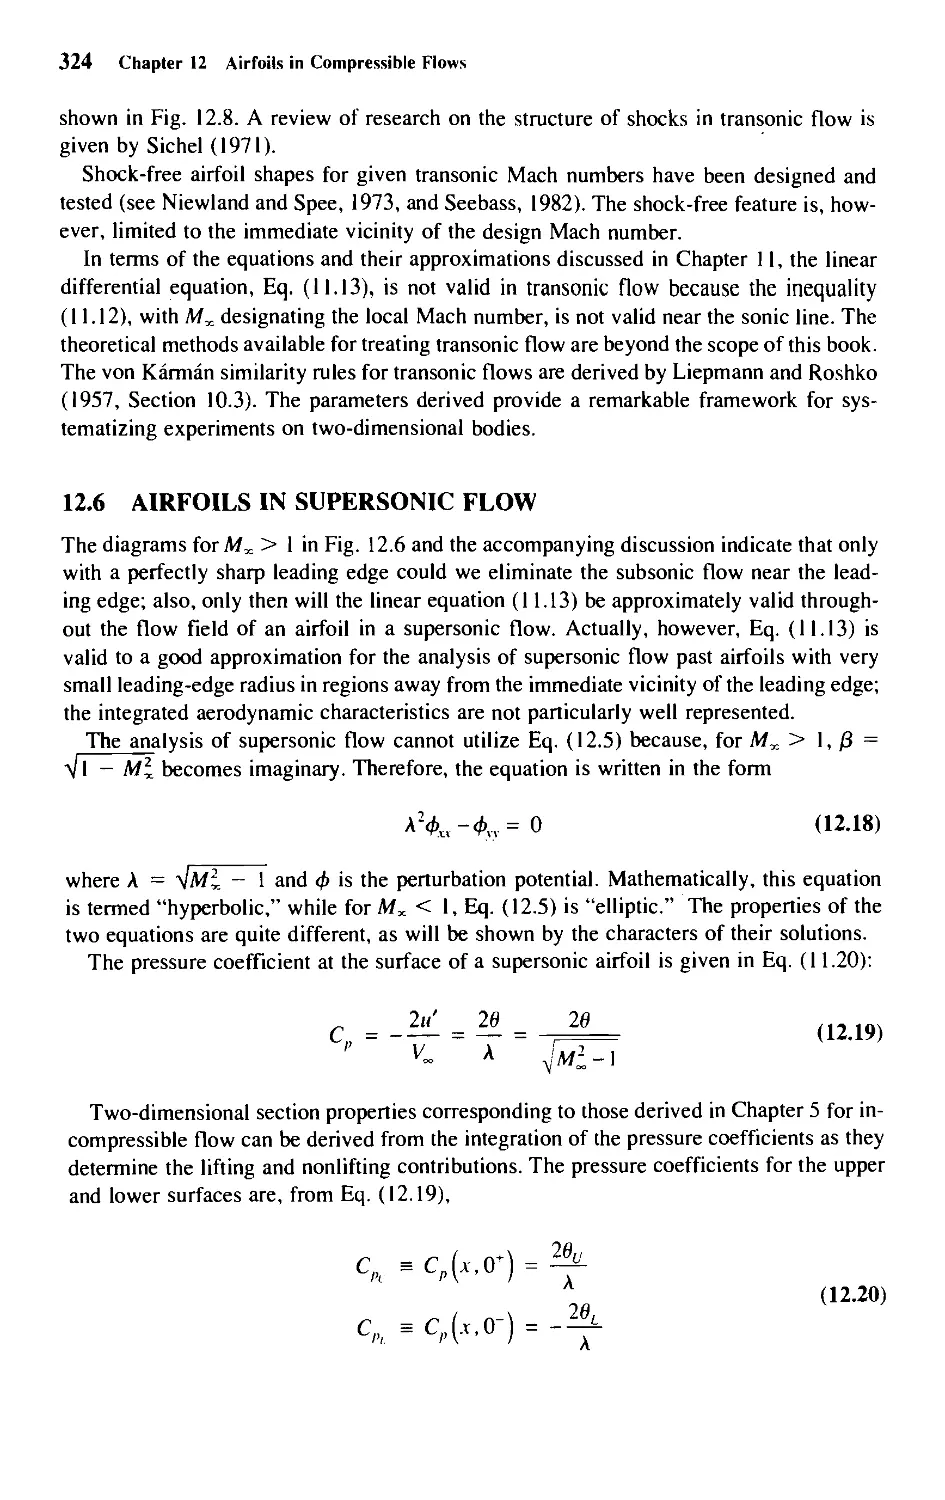 12.6 - Airfoils in Supersonic Flow